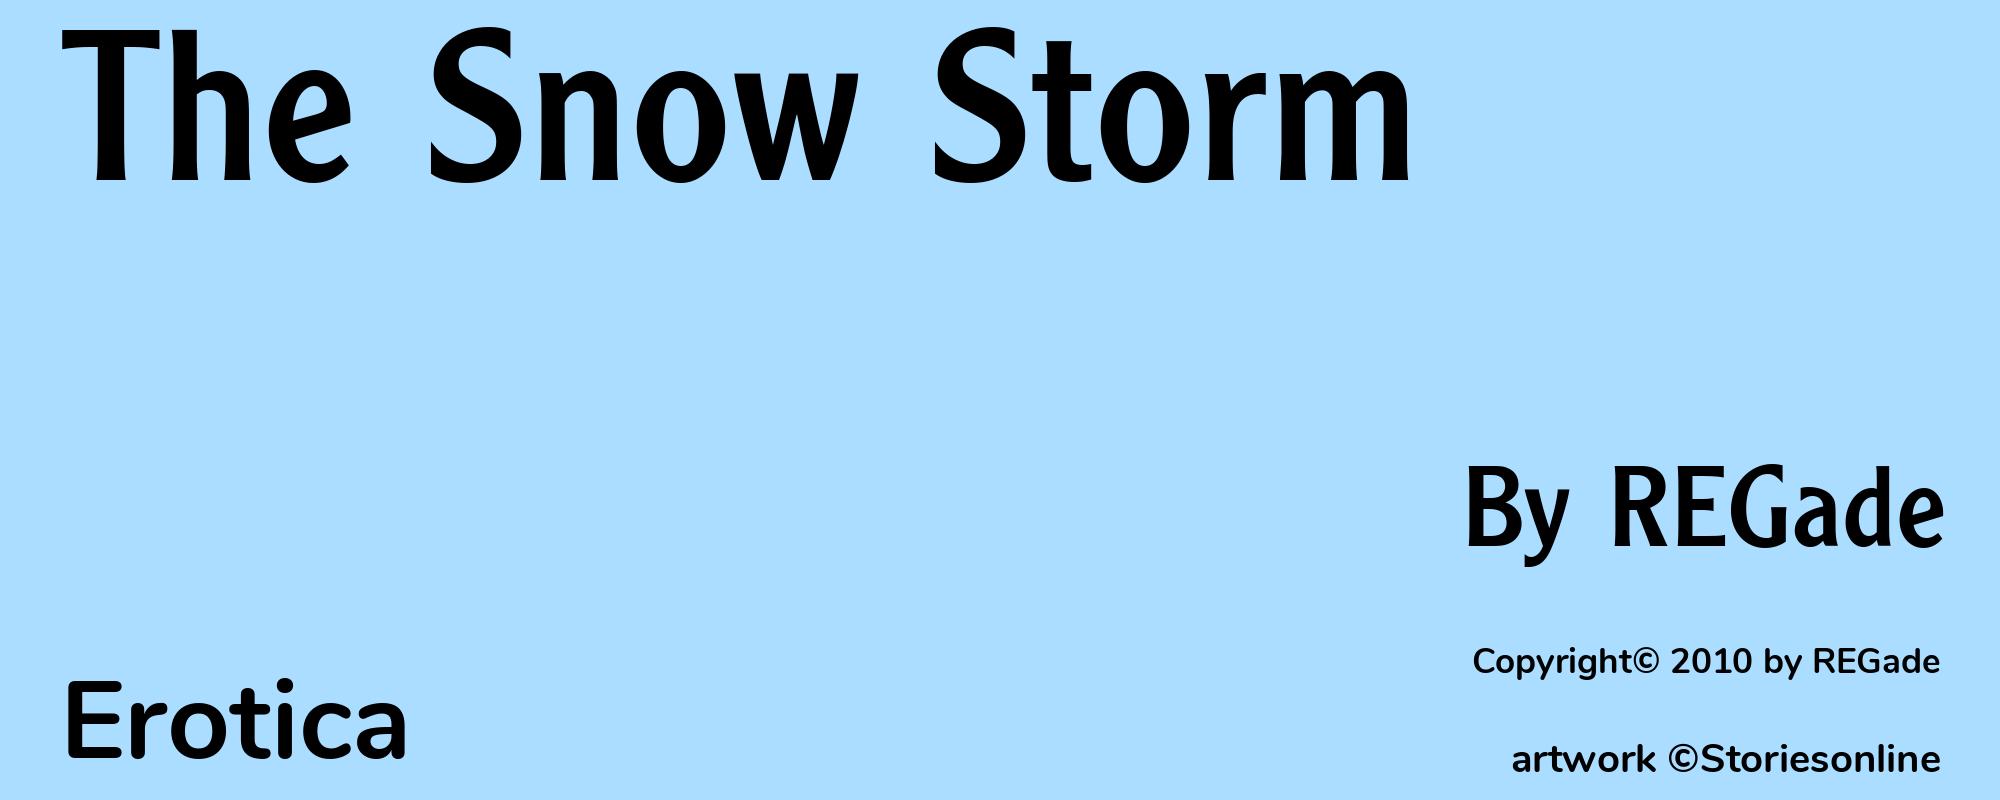 The Snow Storm - Cover